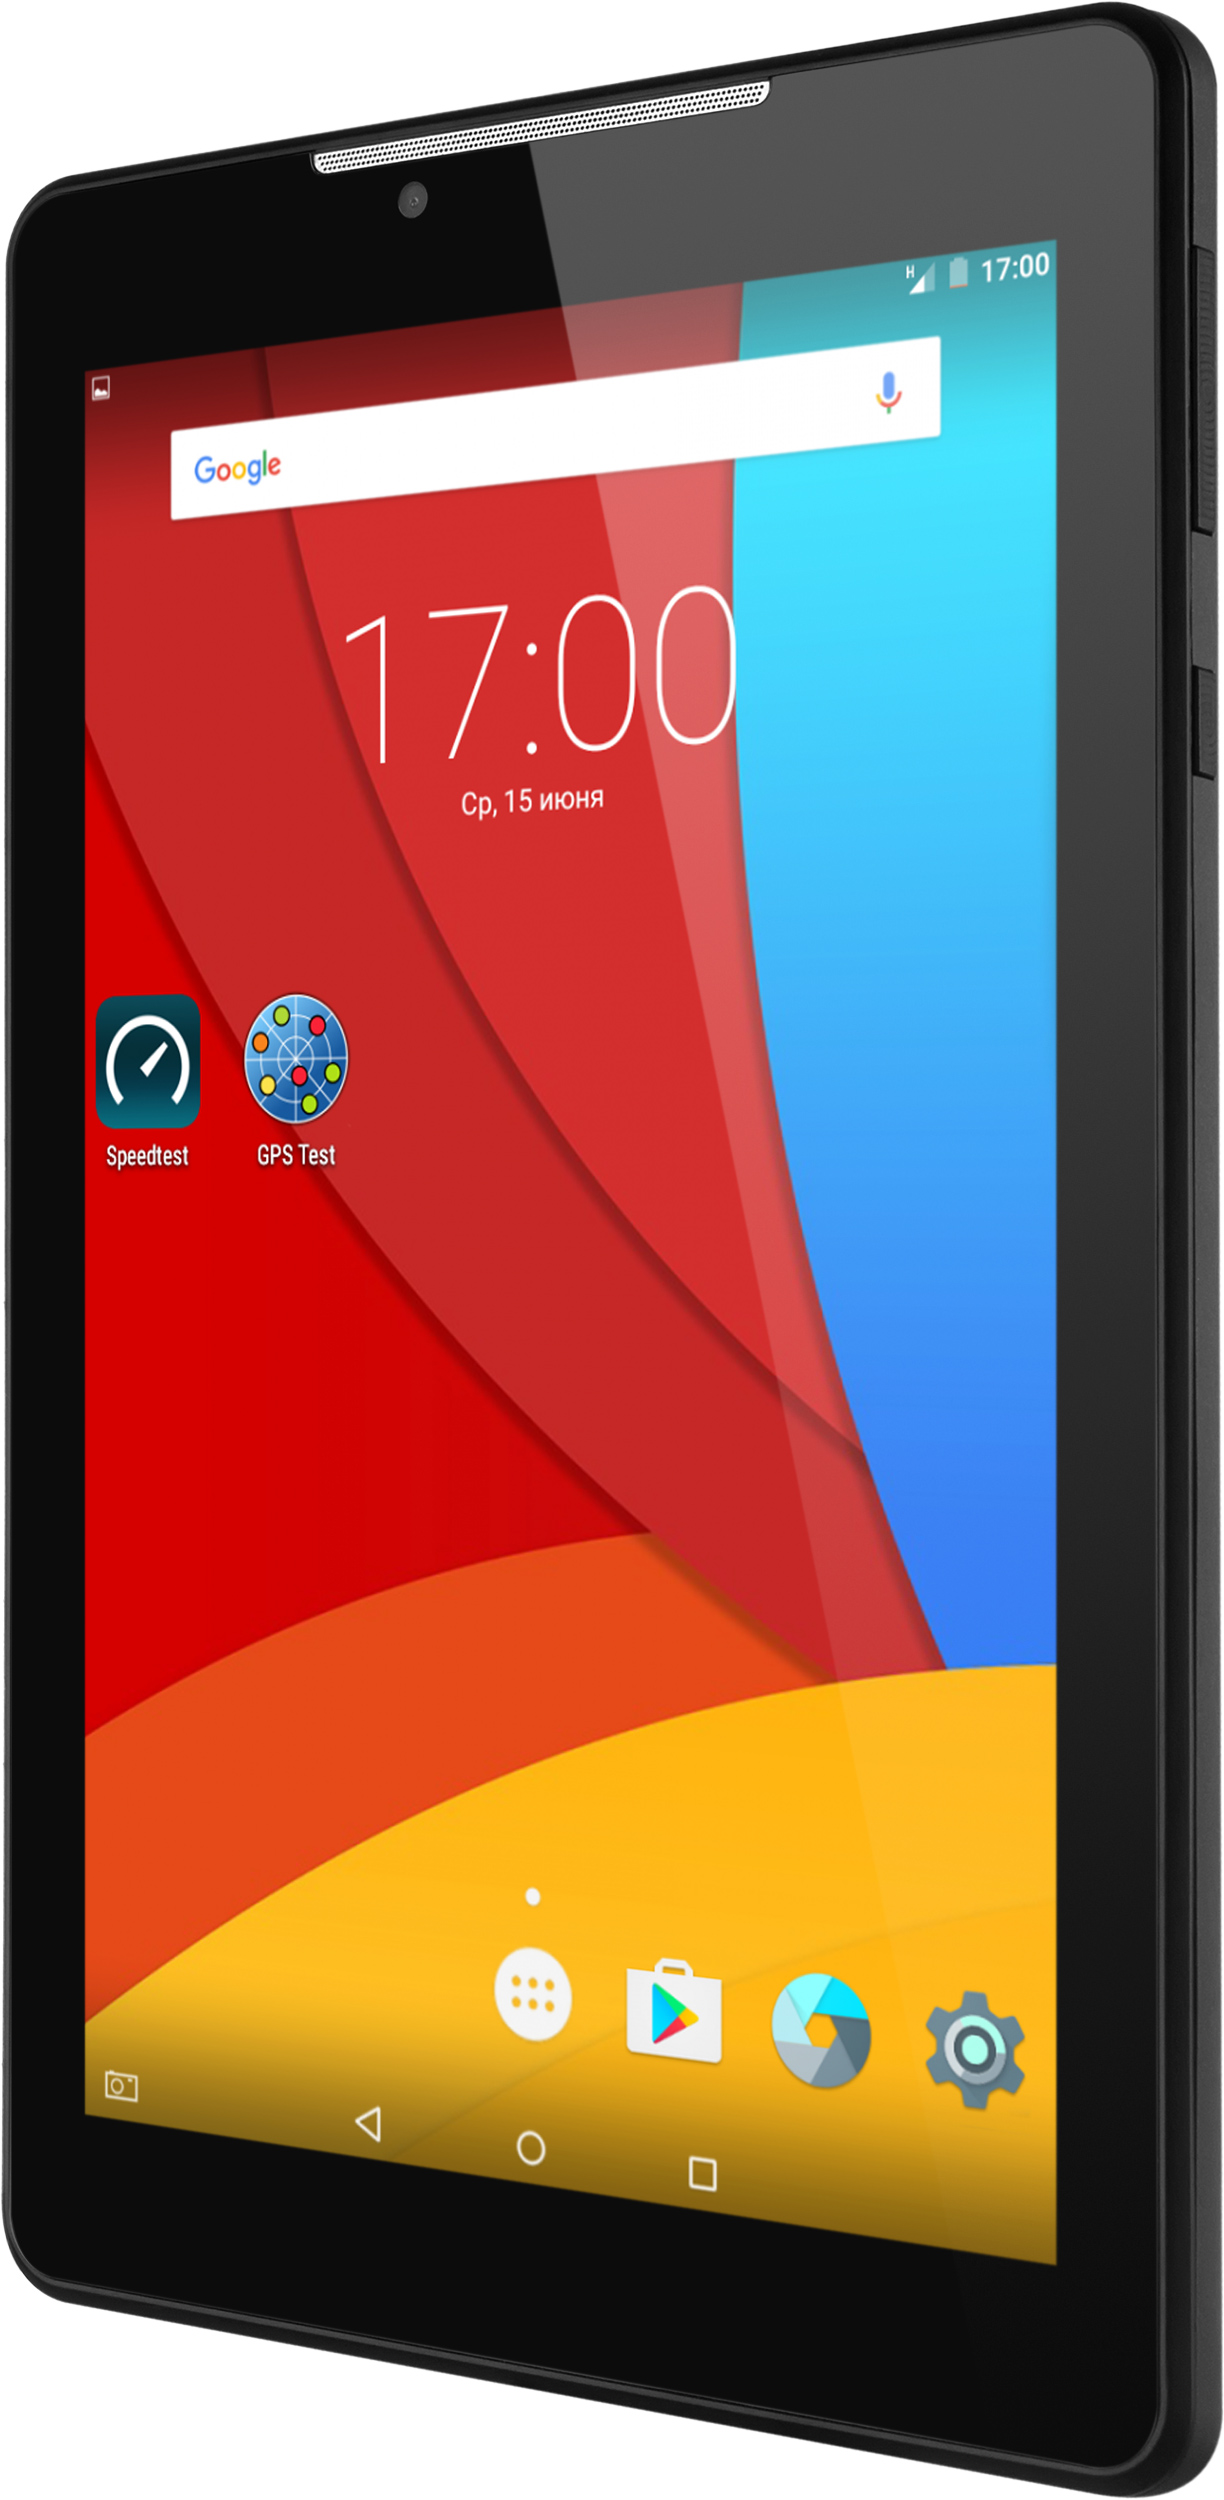 How To Fix Bootloop Or Stuck At Boot Logo Screen And Won’t Restart On PRESTIGIO MultiPad Wize 3797 3G